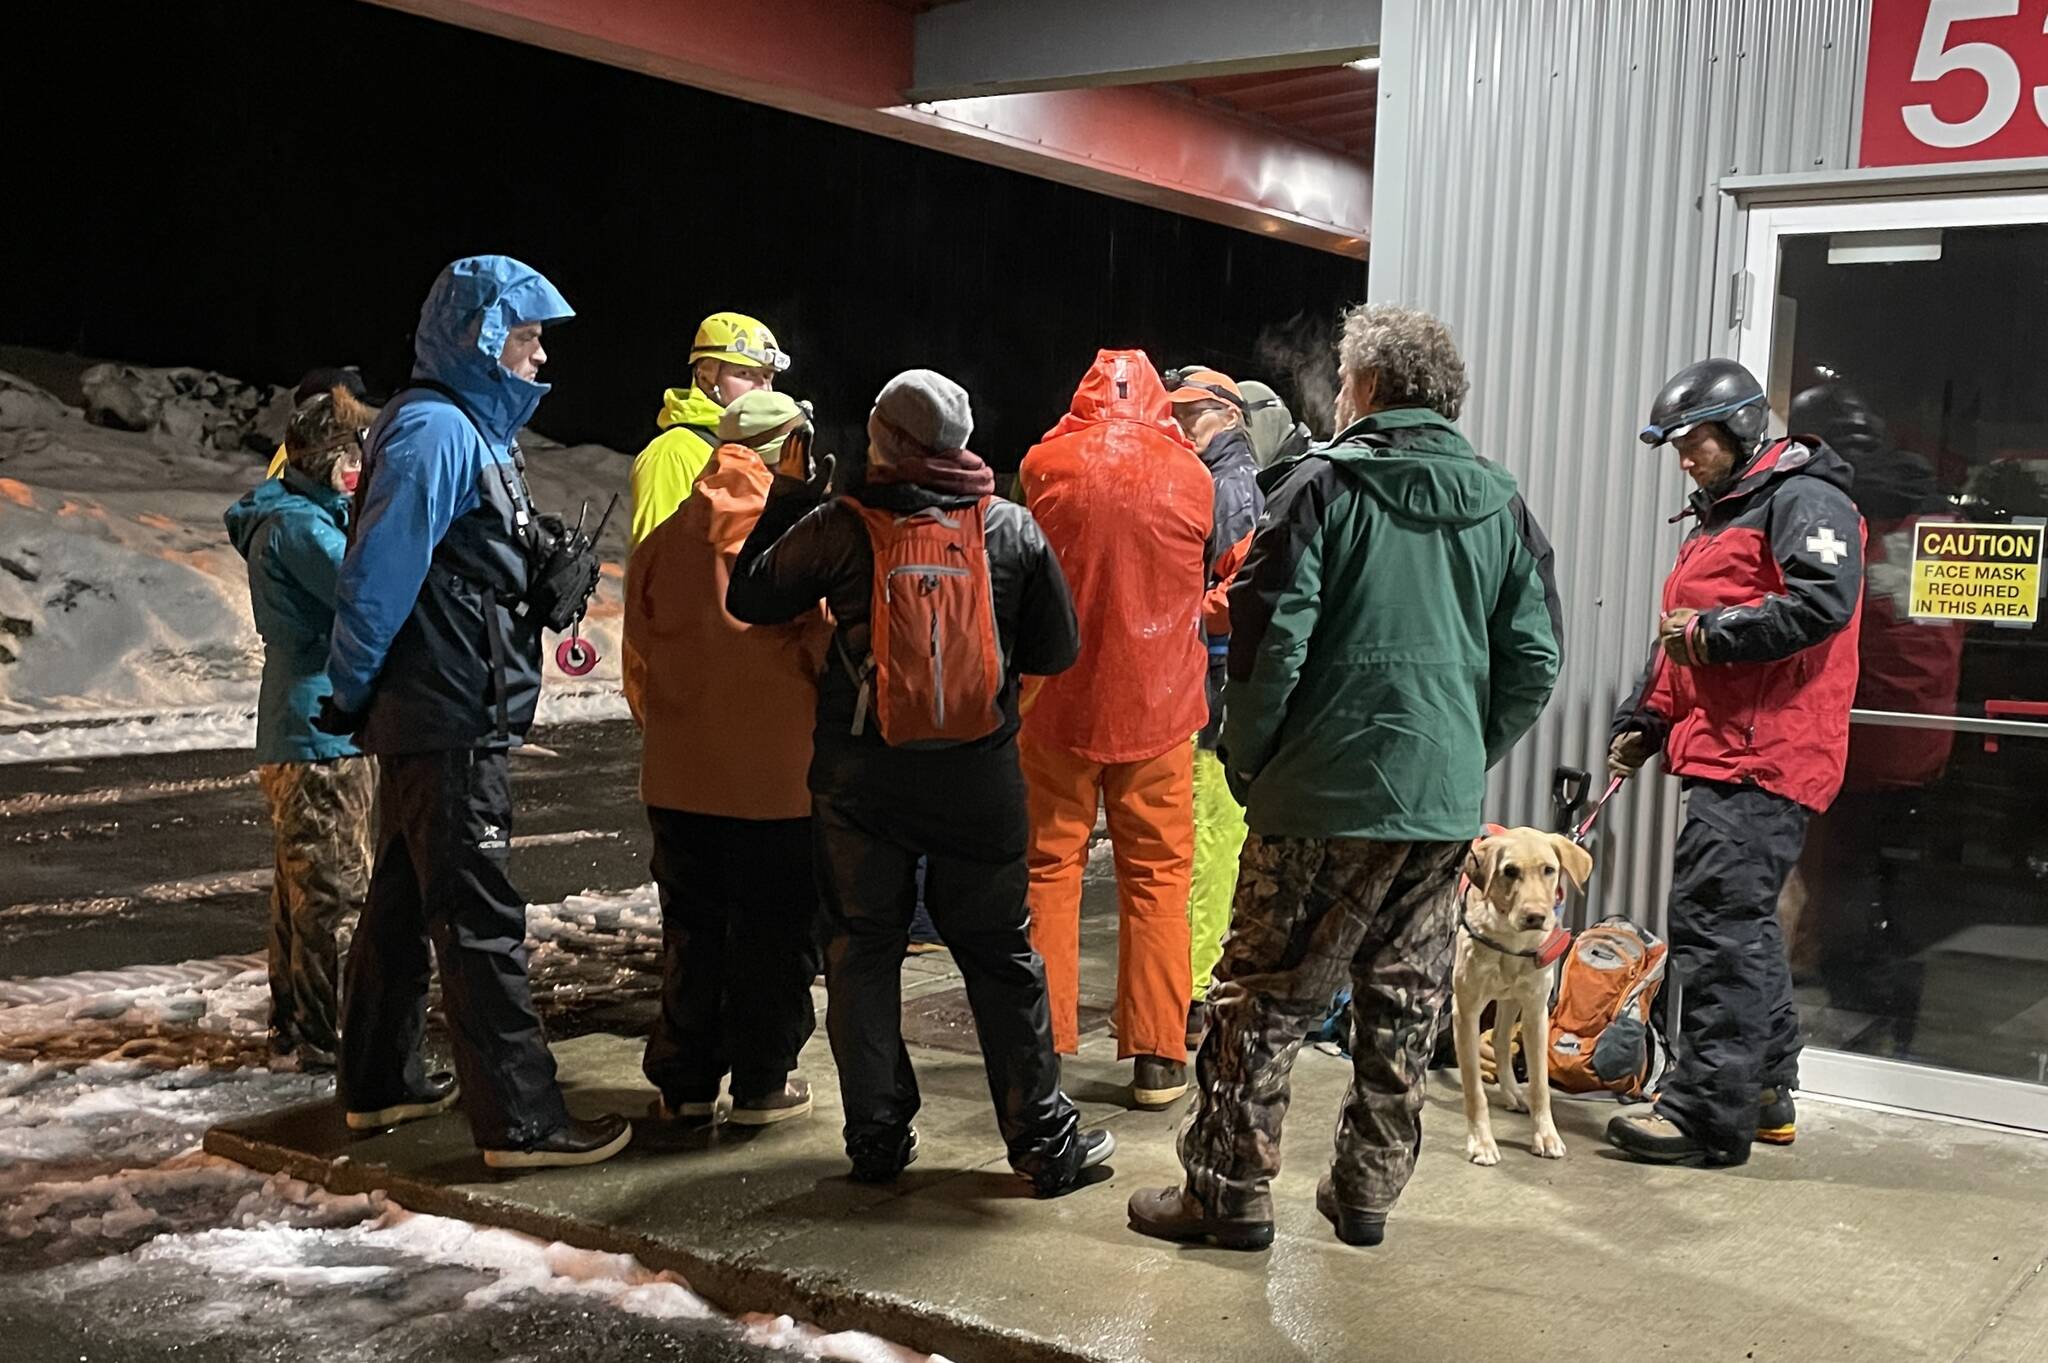 Emergency organizations and search and rescue groups gathered on Friday, Feb. 25, to practice urban avalanche rescues in a large-scale exercise. (Michael S. Lockett / Juneau Empire)